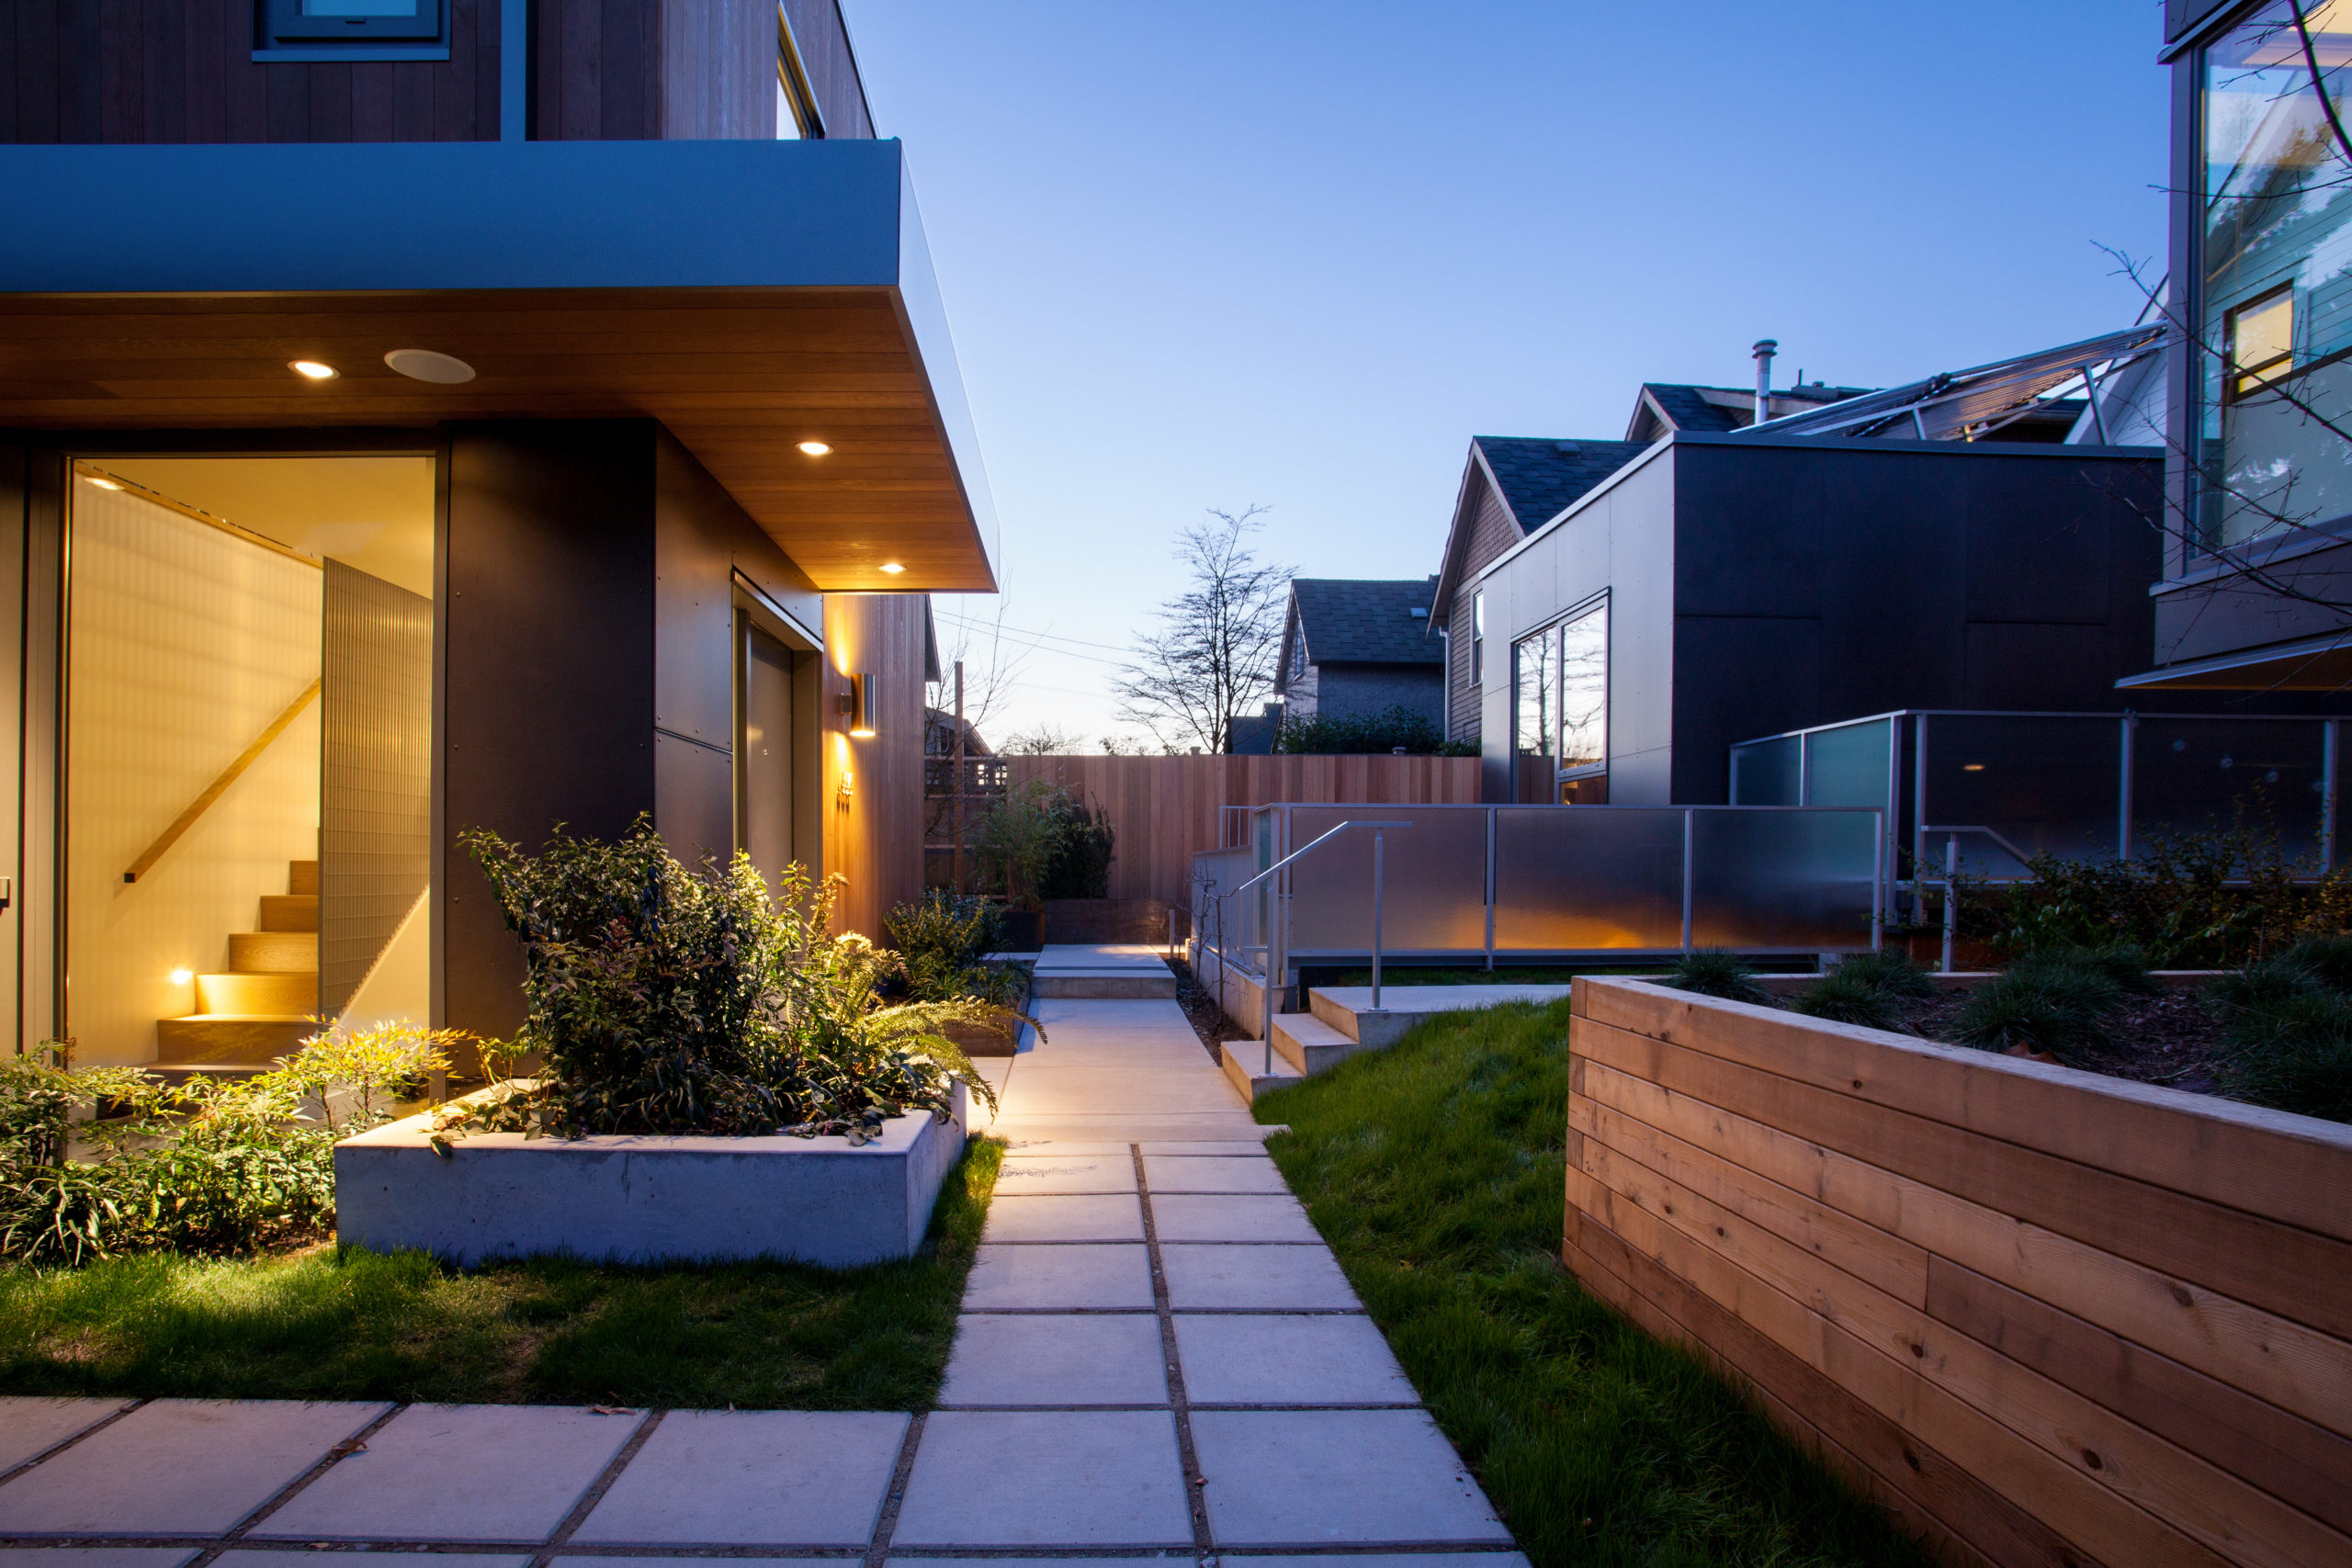 Exterior design with minimalist details at a custom multifamily home in Strathcona.